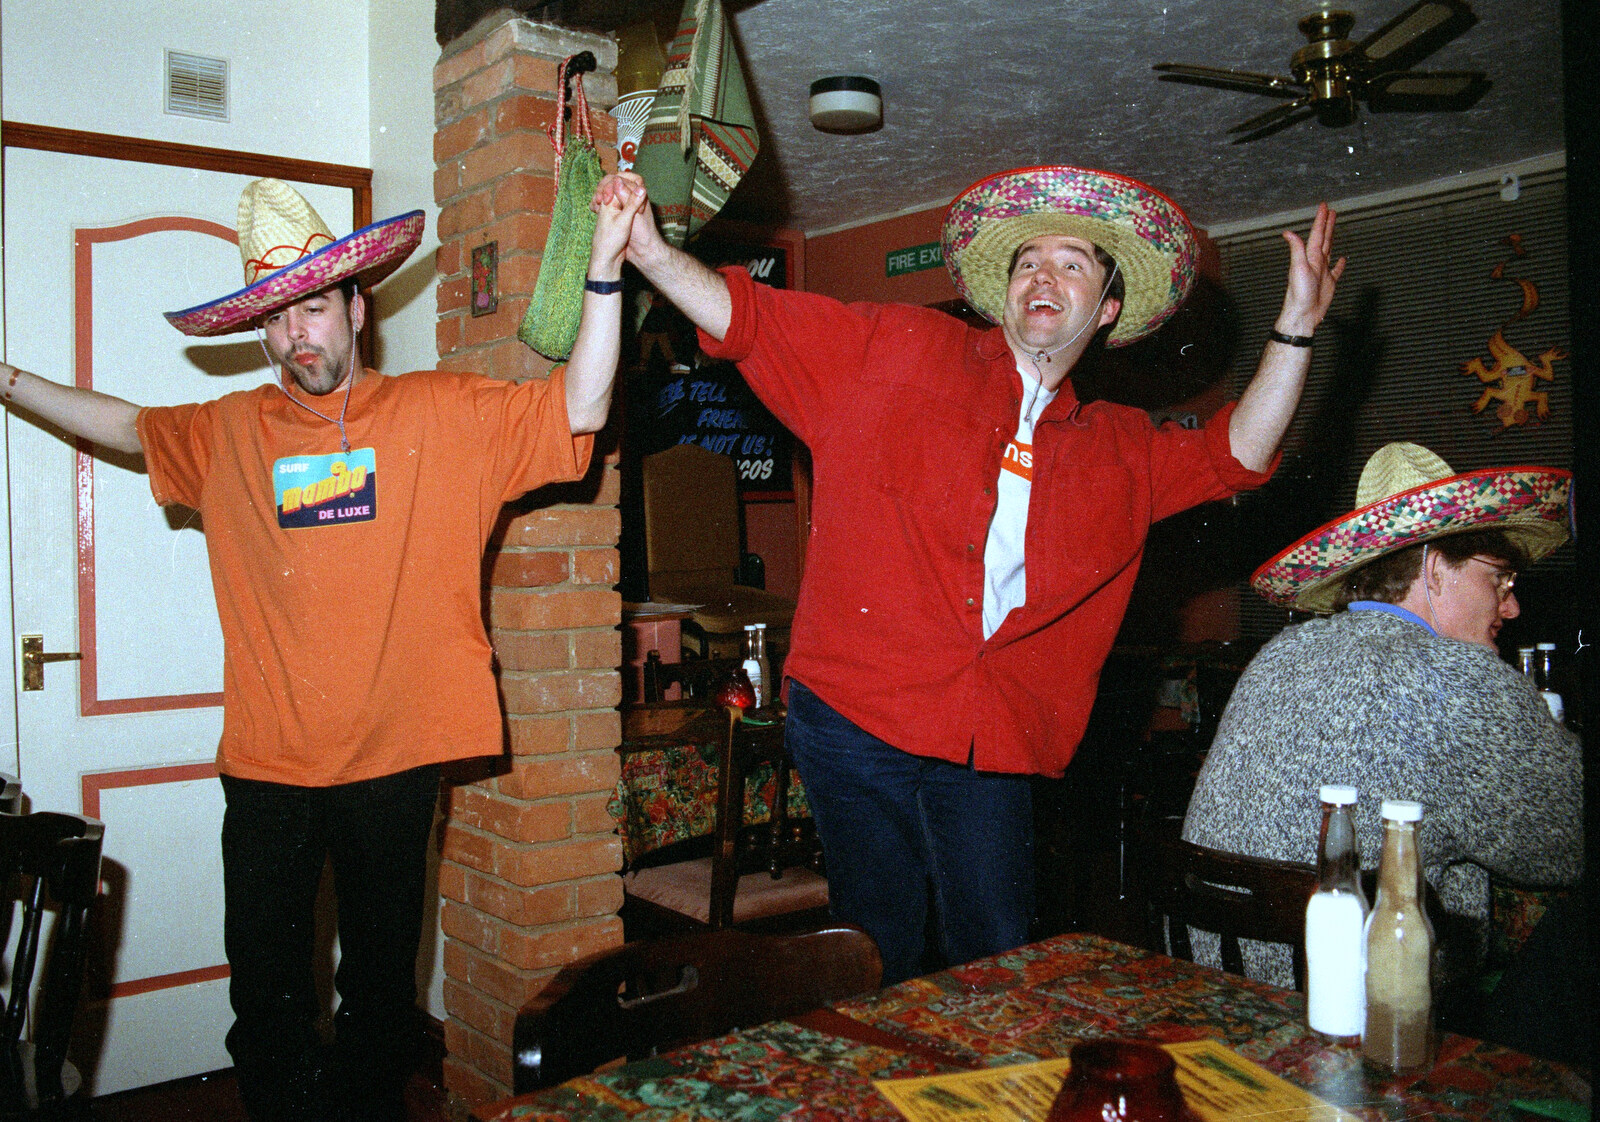 CISU, Los Mexicanos and the Inflatable Woman, Ipswich, Suffolk - 25th April 1996: Trevor and Tim do some dancing